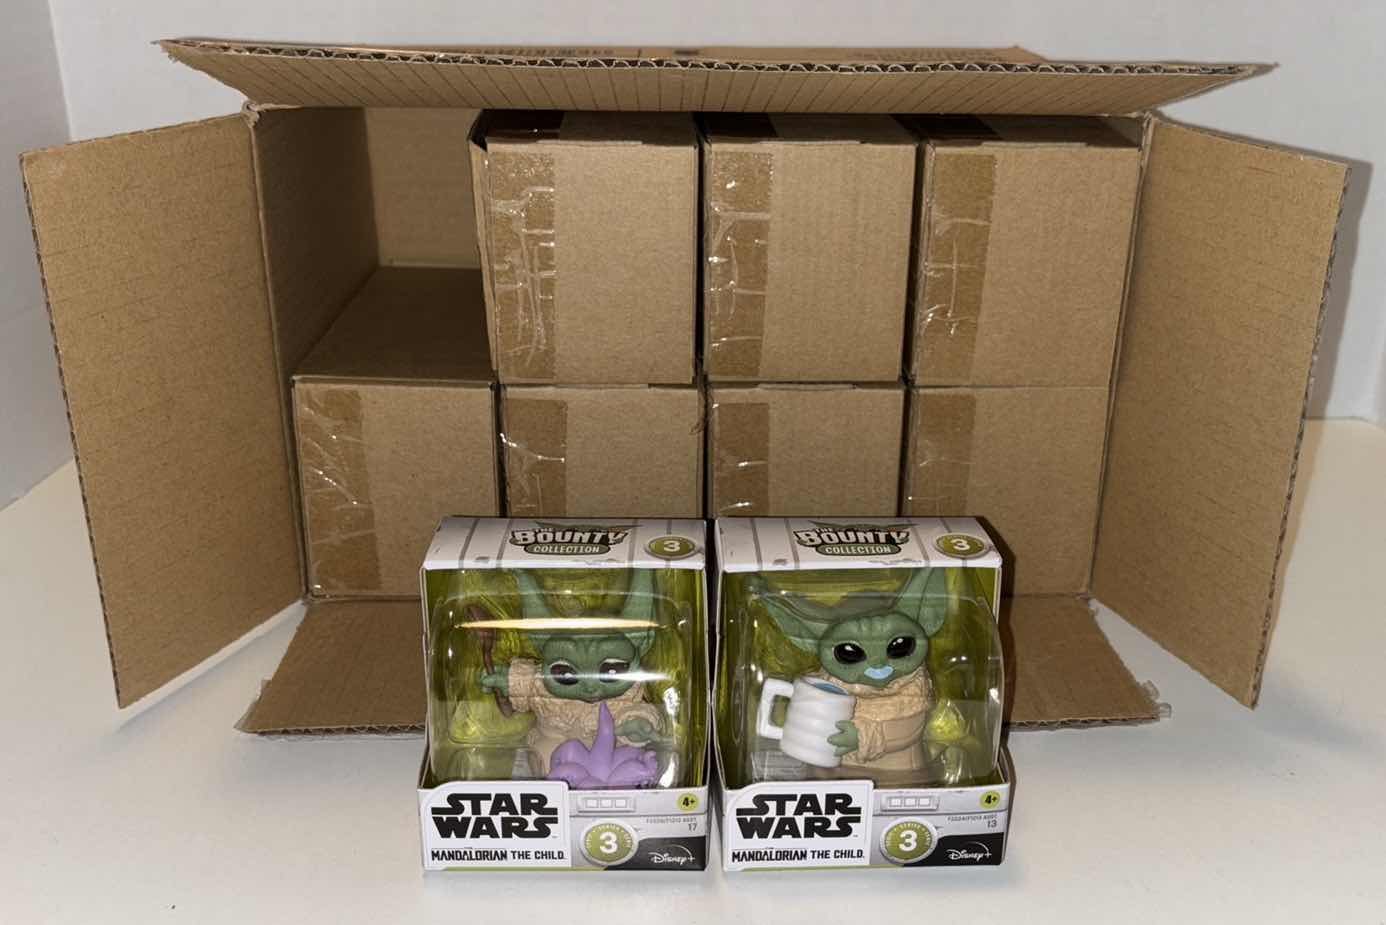 Photo 1 of NEW STAR WARS THE BOUNTY COLLECTION SERIES 3 THE CHILD POSED COLLECTIBLE 2-PACK FIGURES, “TENTACLE SURPRISE” & “BLUE MILK MUSTACHE” (CASE OF 8)